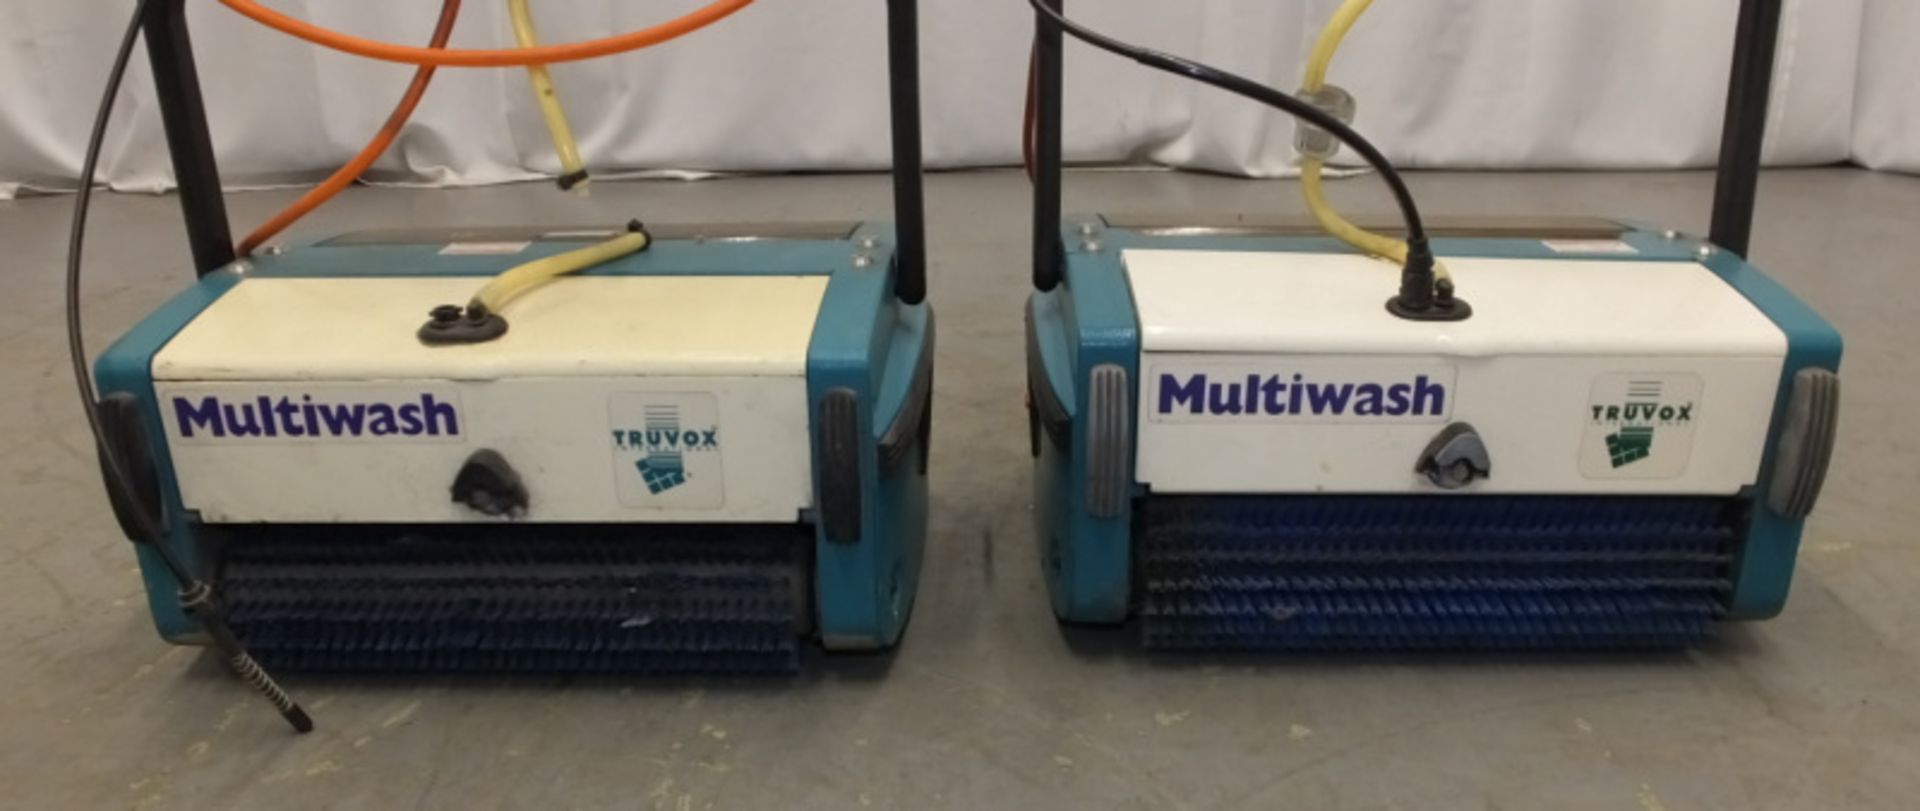 2 x Truvox Multiwash Scrubber Dryers - MW340/PUMP and MW340/PUMP - Image 2 of 4